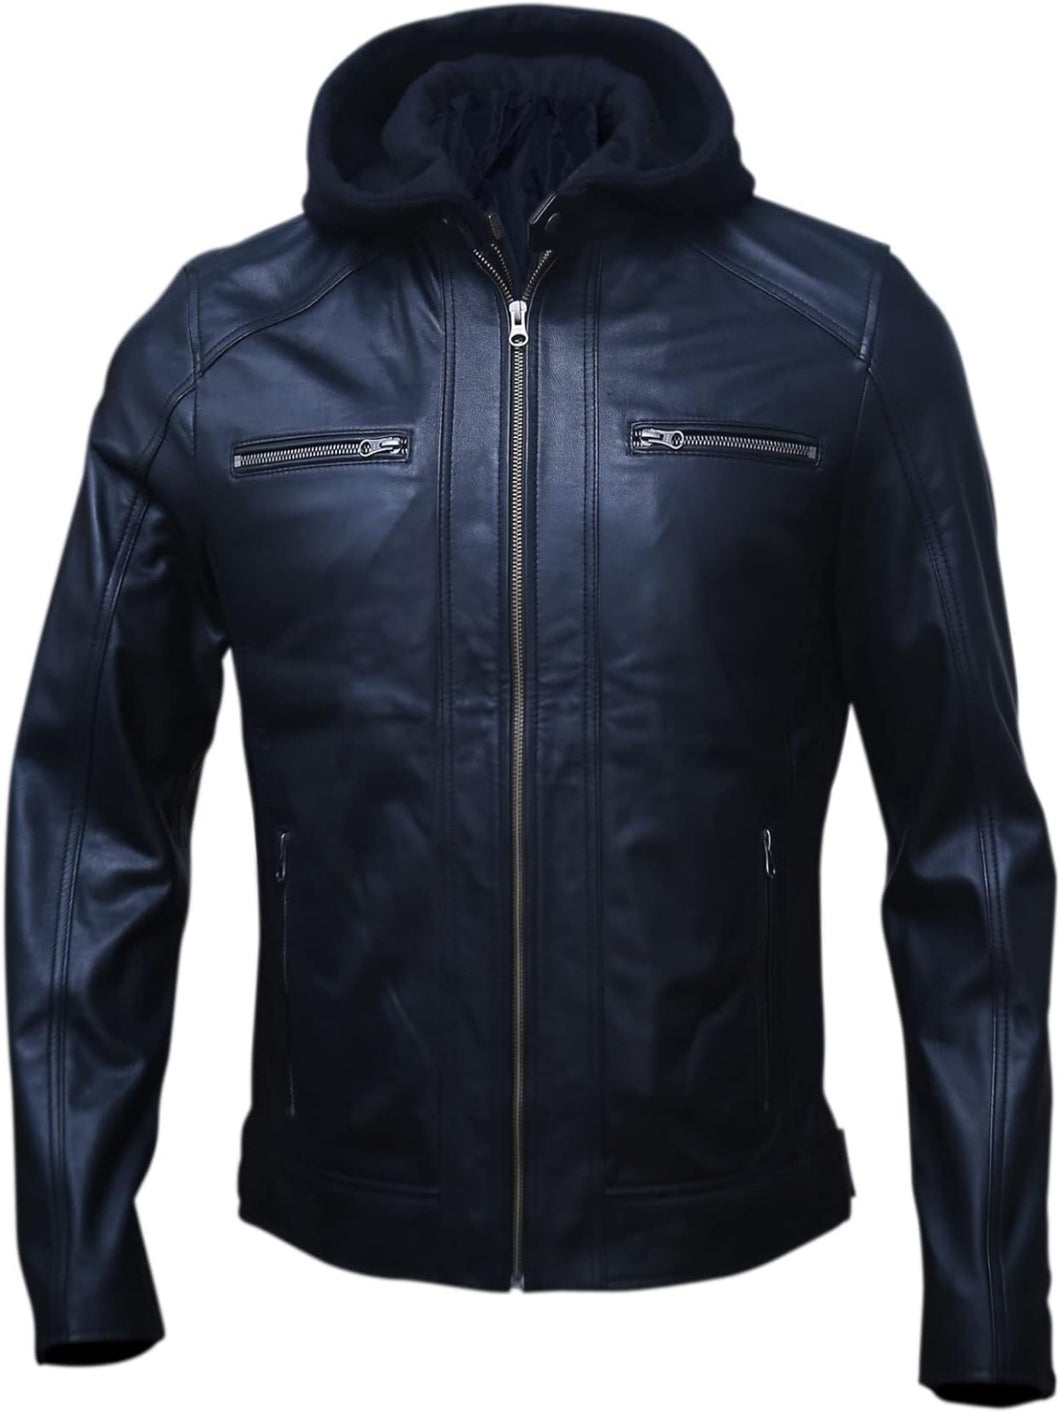 Men's Black Motorcycle Genuine Lether Jacket with Removable Hood